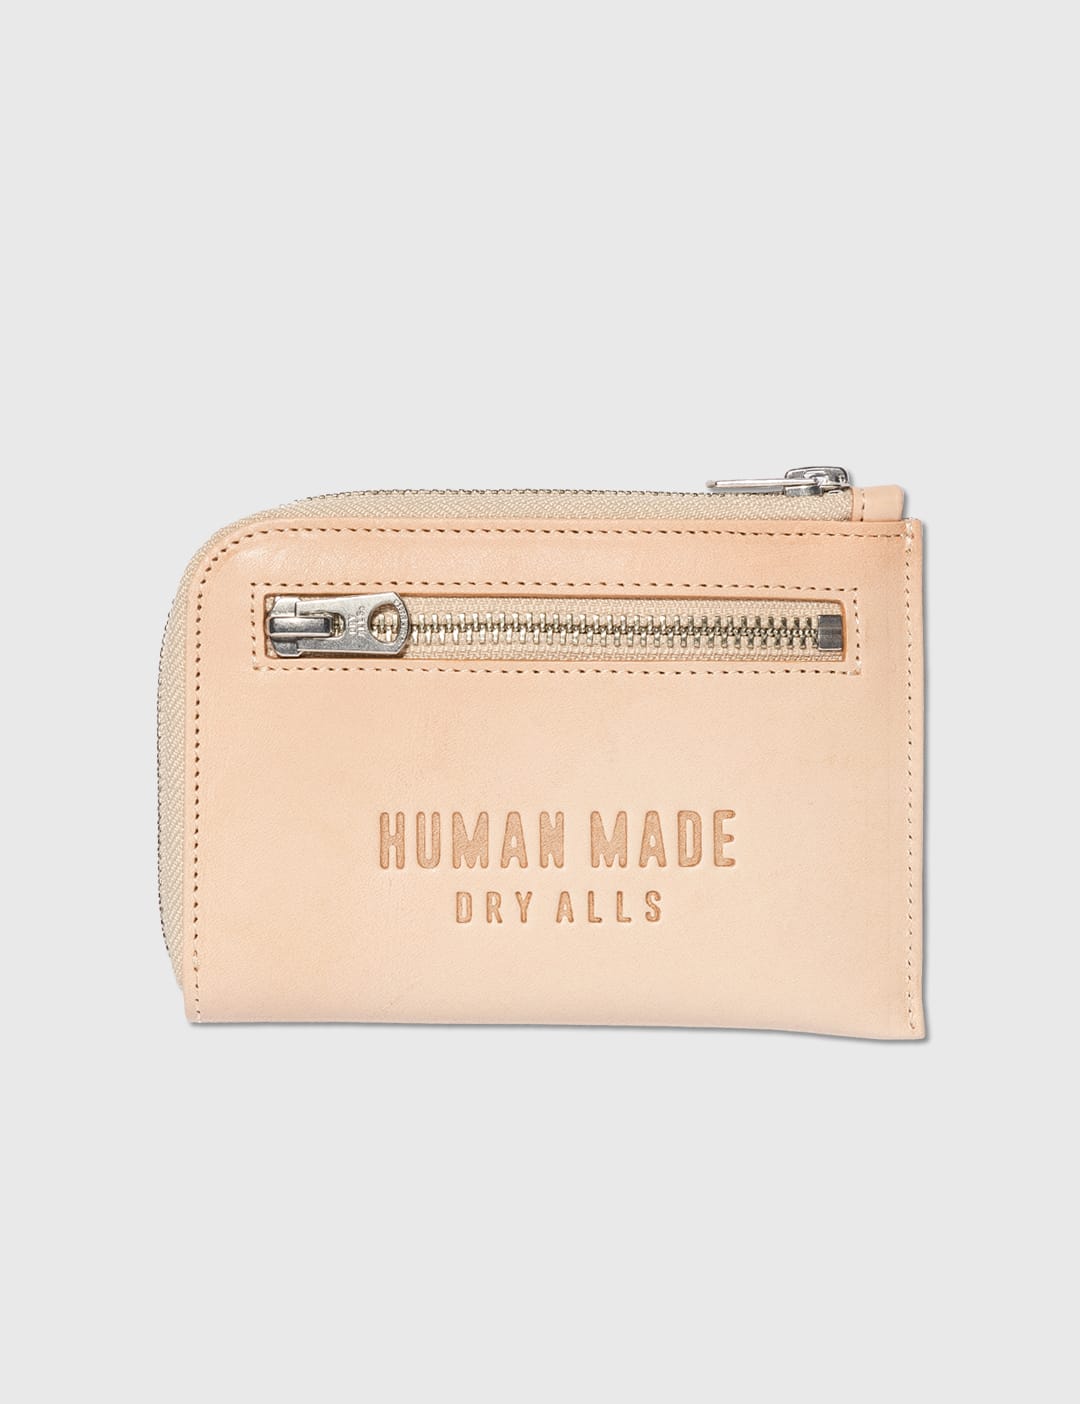 Human Made   Leather Wallet   HBX   Globally Curated Fashion and